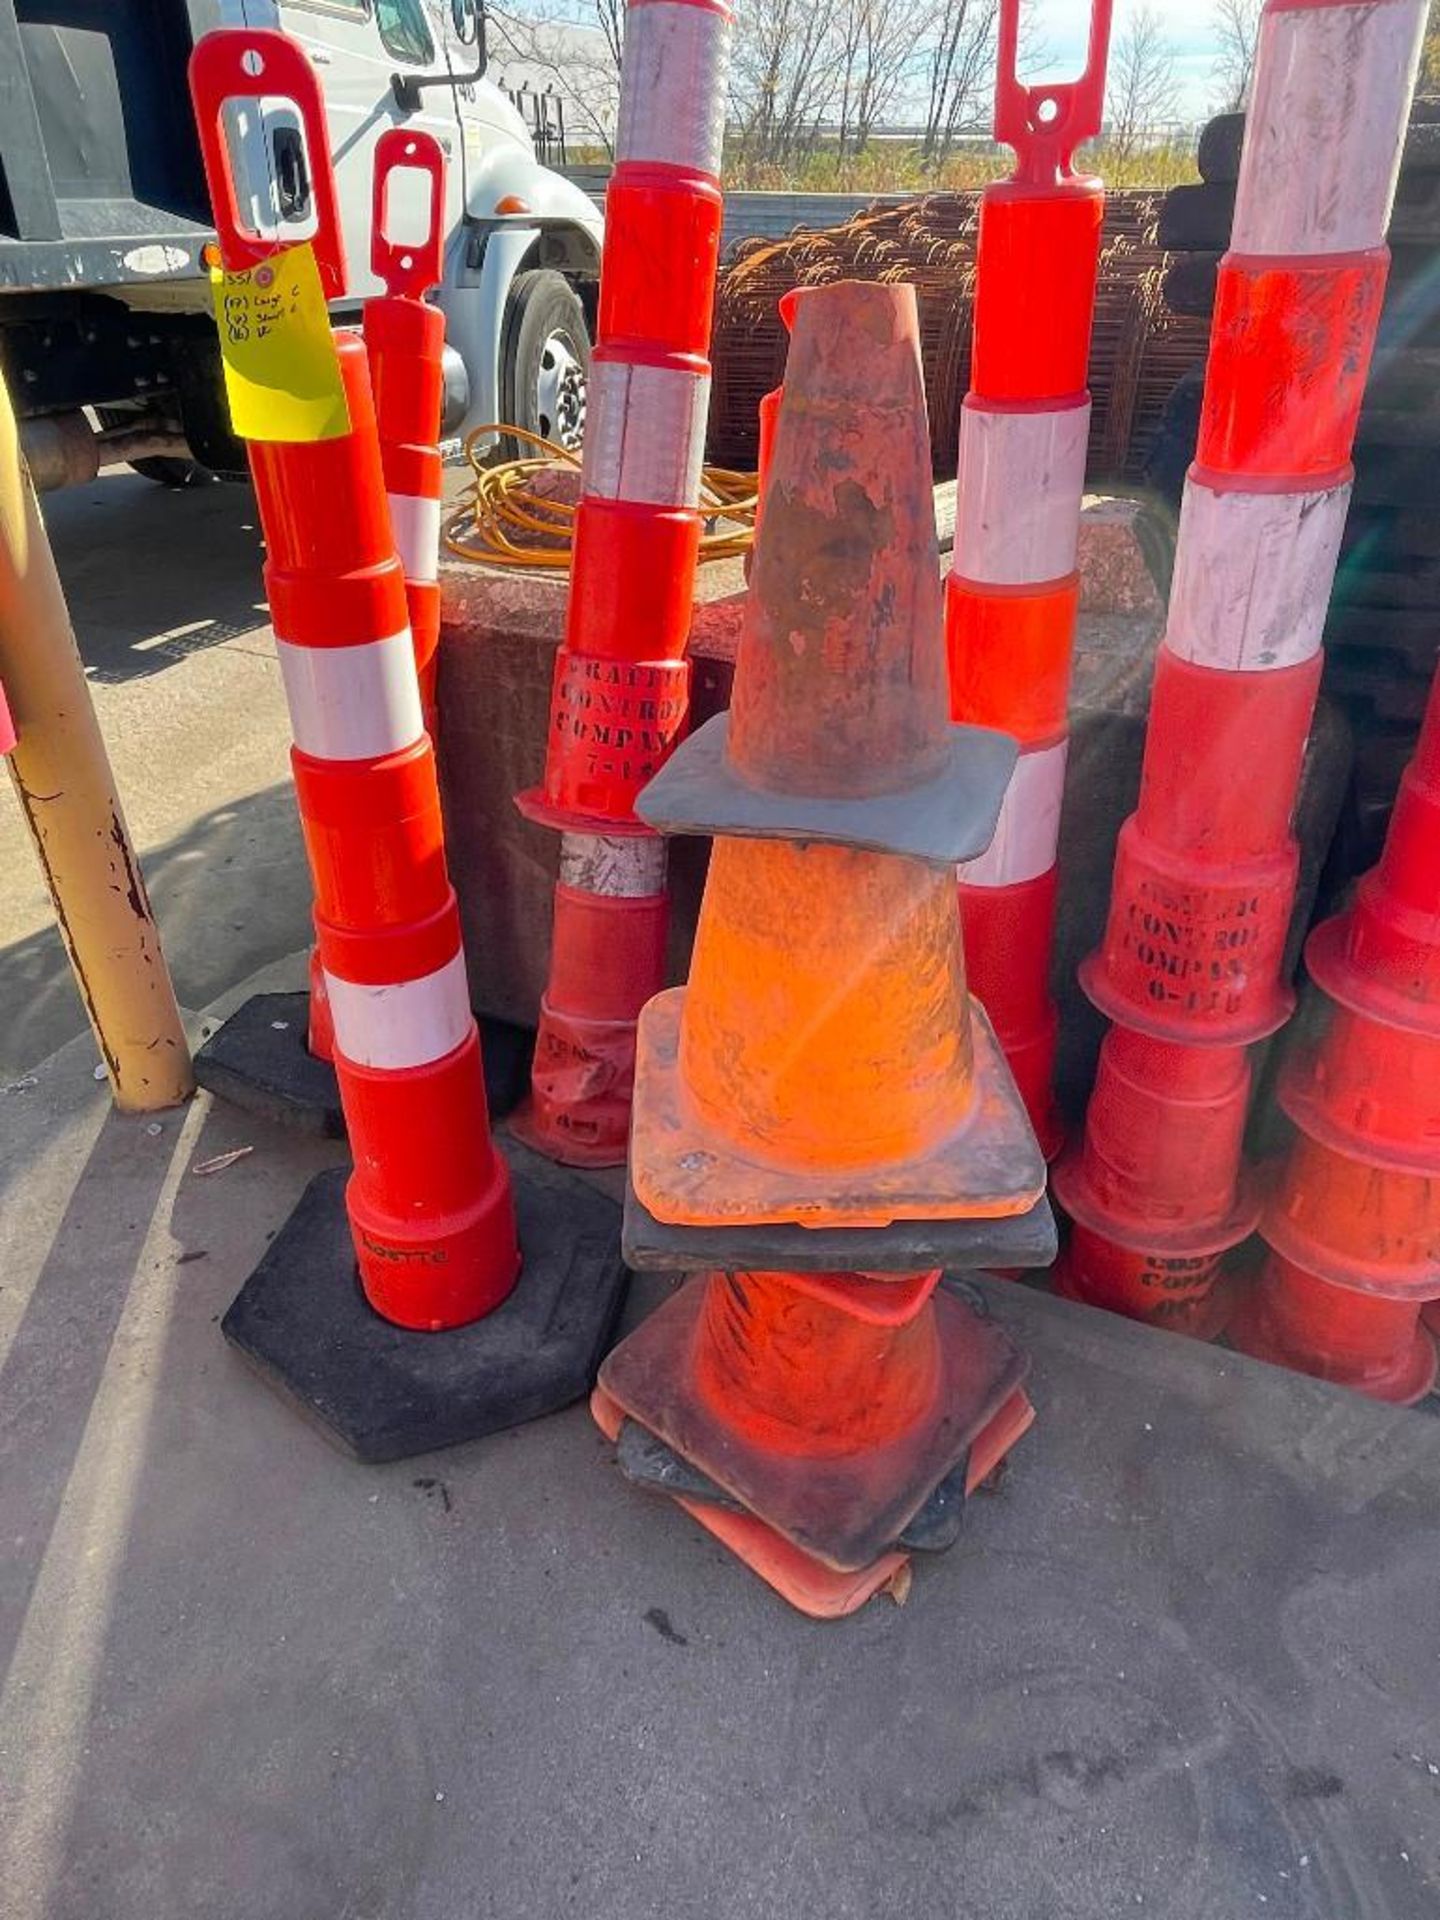 Traffic Construction Cones. Located in Hazelwood, MO - Image 4 of 5